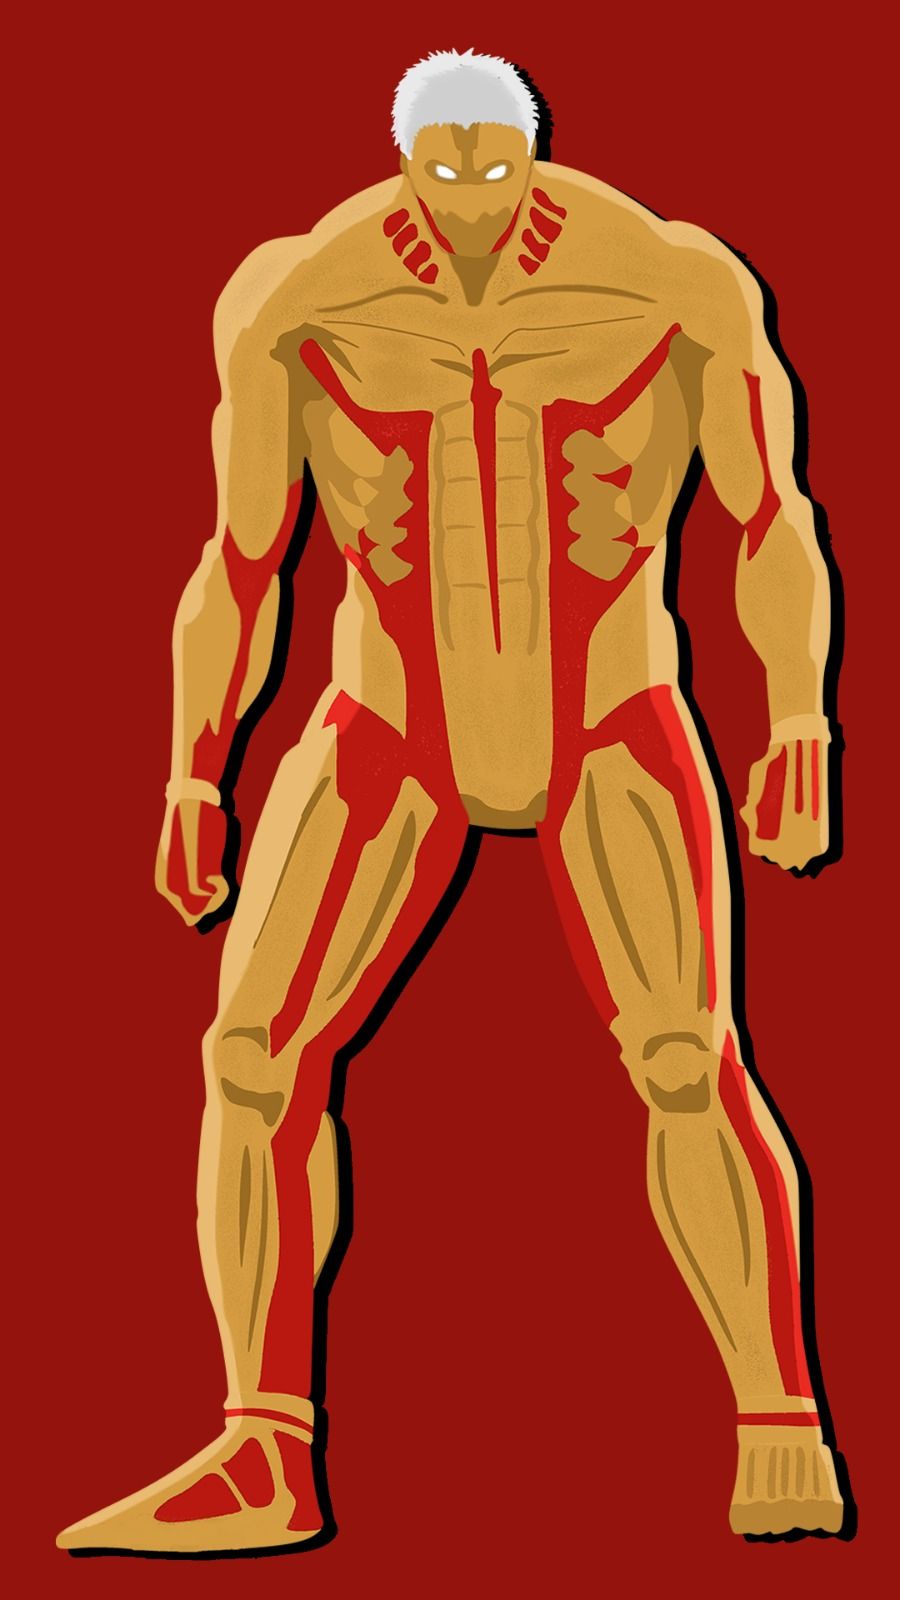 Needed a new wallpaper so I made the armored titan